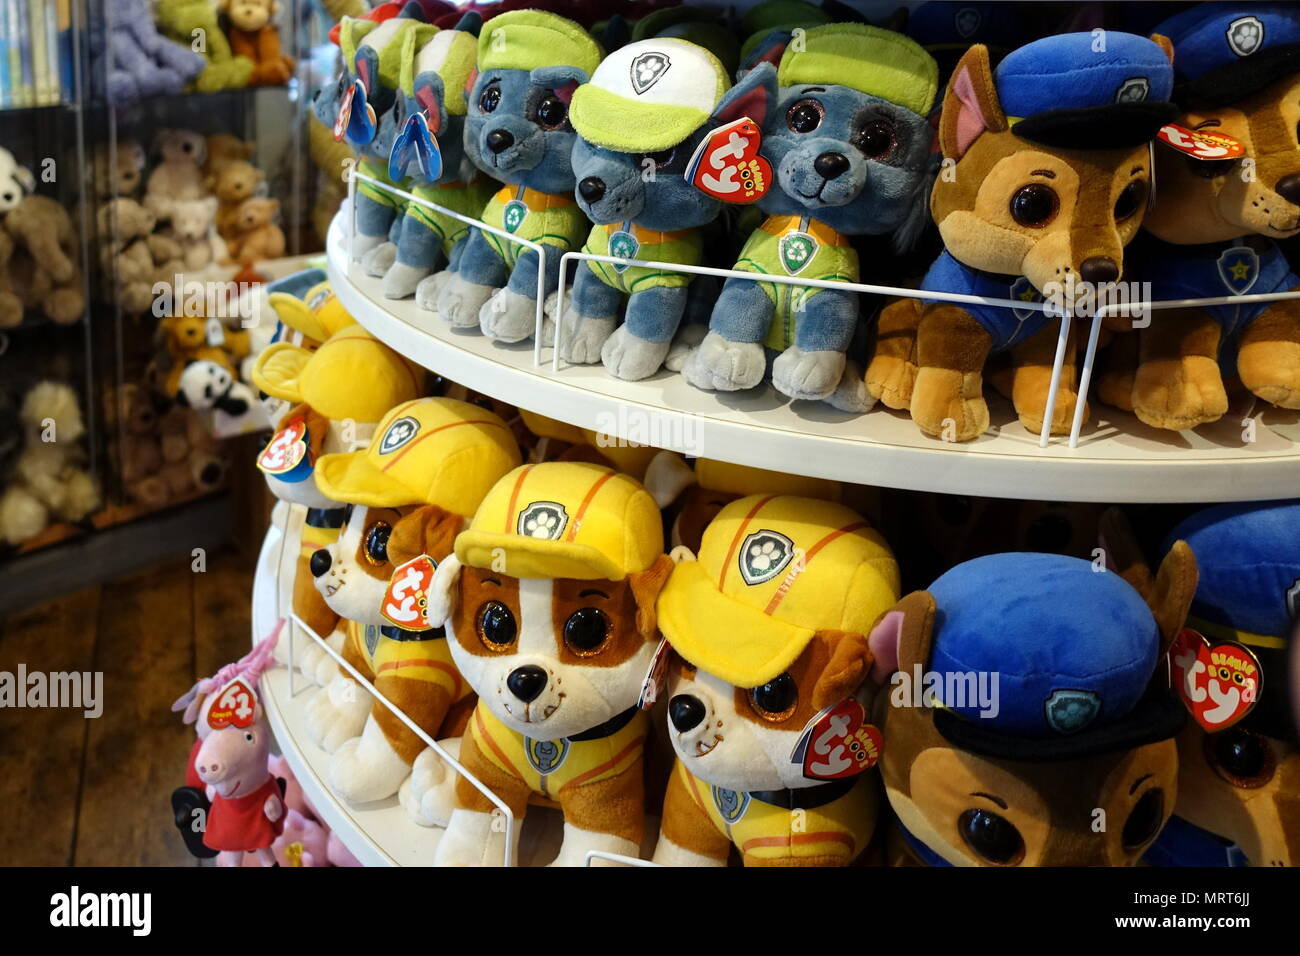 Padstow, Cornwall, April 11th 2018: Cuddly soft toys from the kids TV shop Paw Patrol for sale in a gift shop Stock Photo